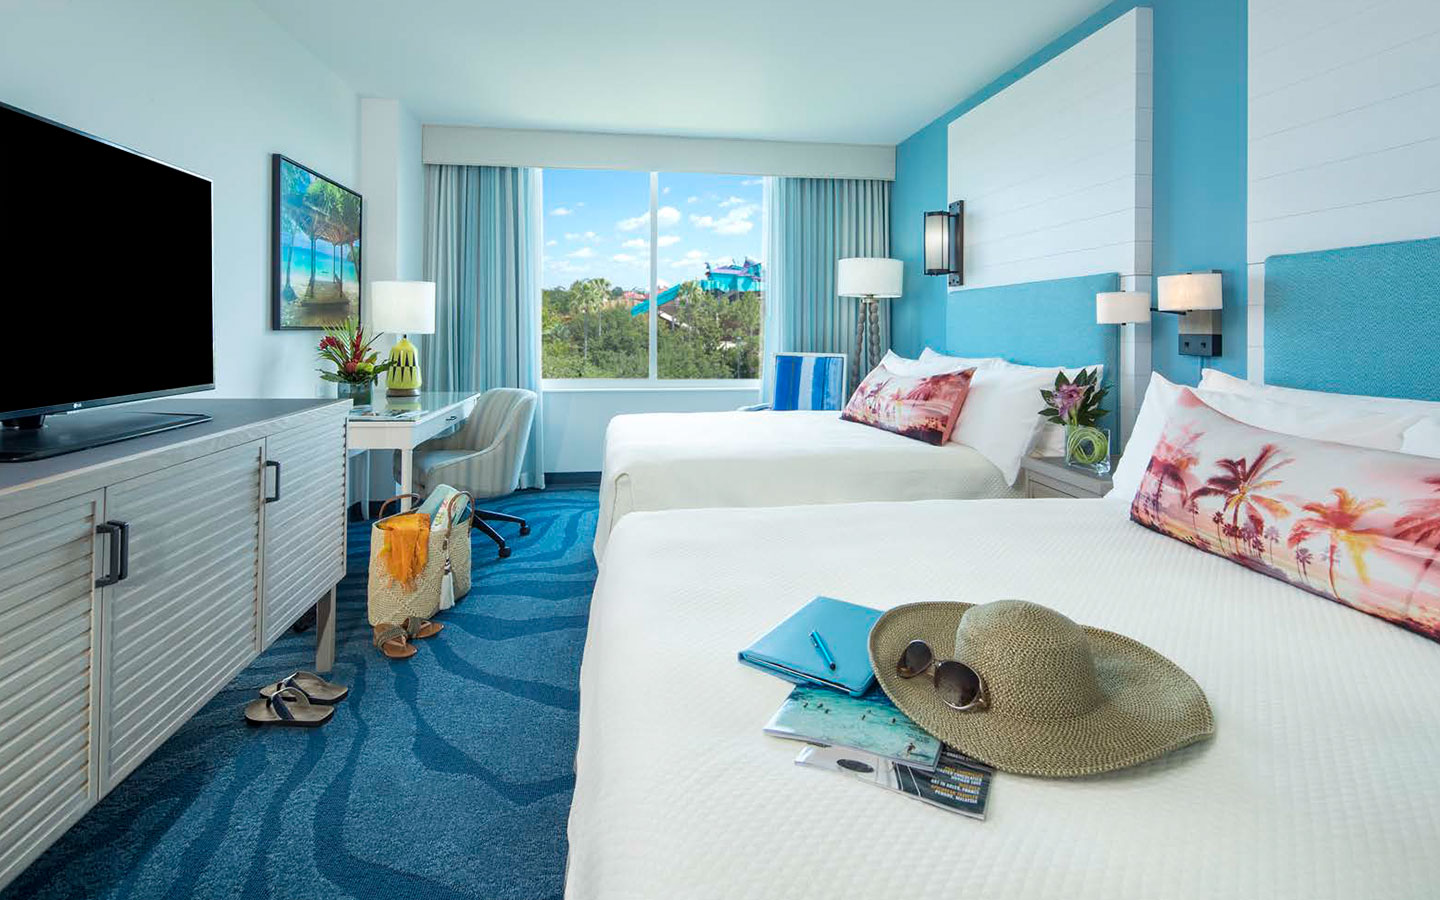 Relax during your next vacation to Universal Orlando Resort with a stay at Loews Sapphire Falls Resort.